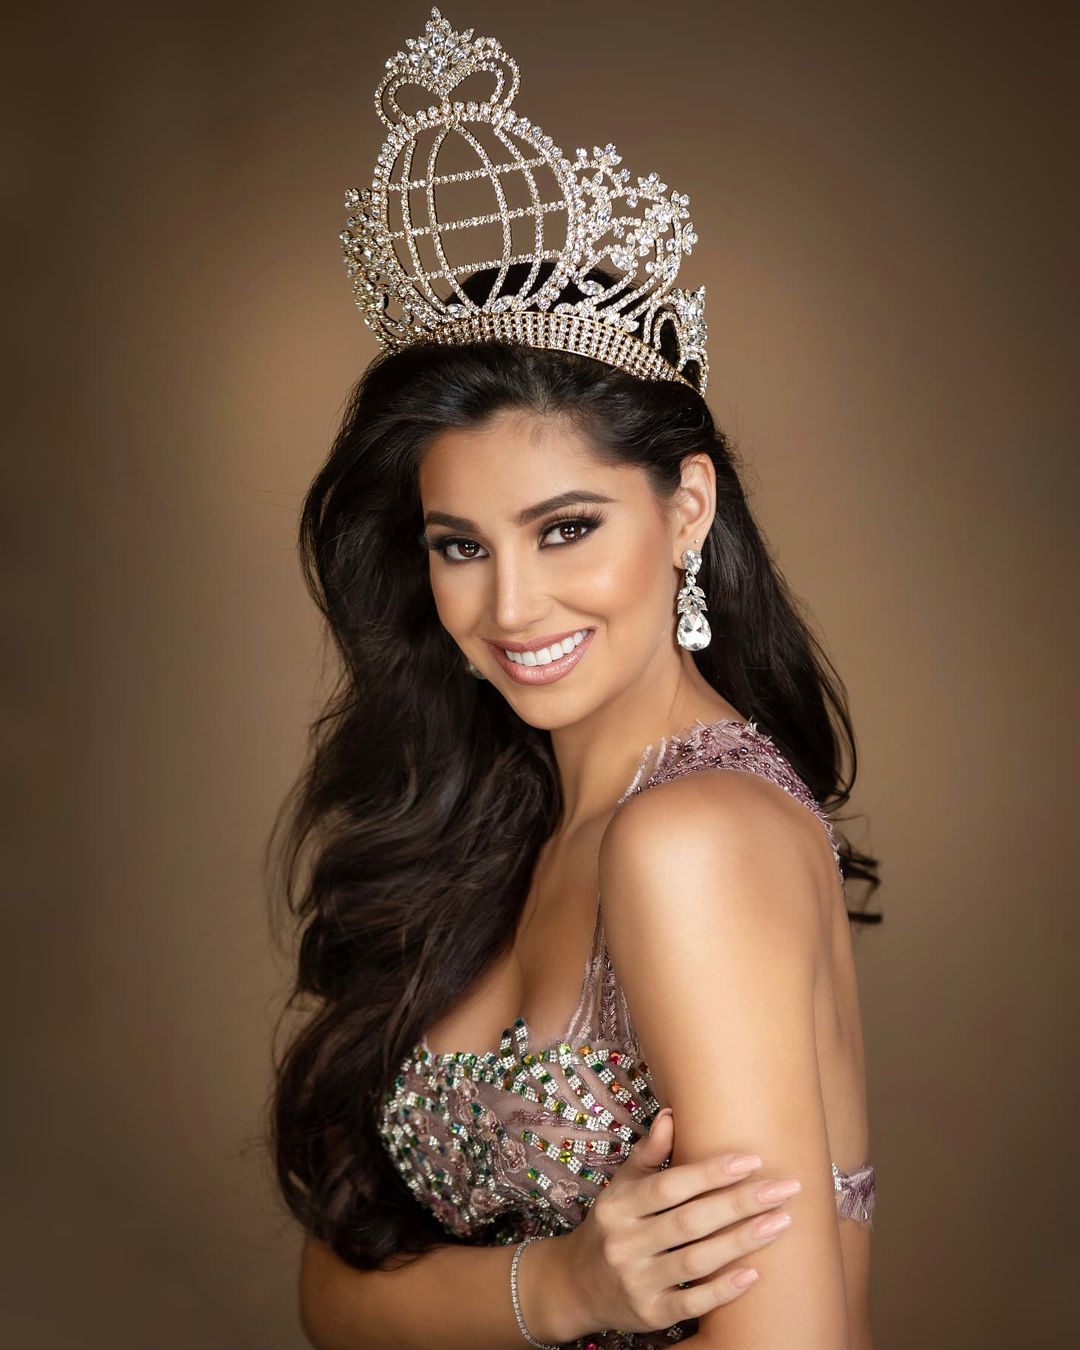 Missosology on Twitter: "𝗟𝗢𝗢𝗞 | #MissMundoColombia 2021 Andrea Aguilera  in her official portrait! After finishing first runner-up in #MissWorld  four times (1981, 1983, 1996, 2002), will Colombia finally bring home the  elusive